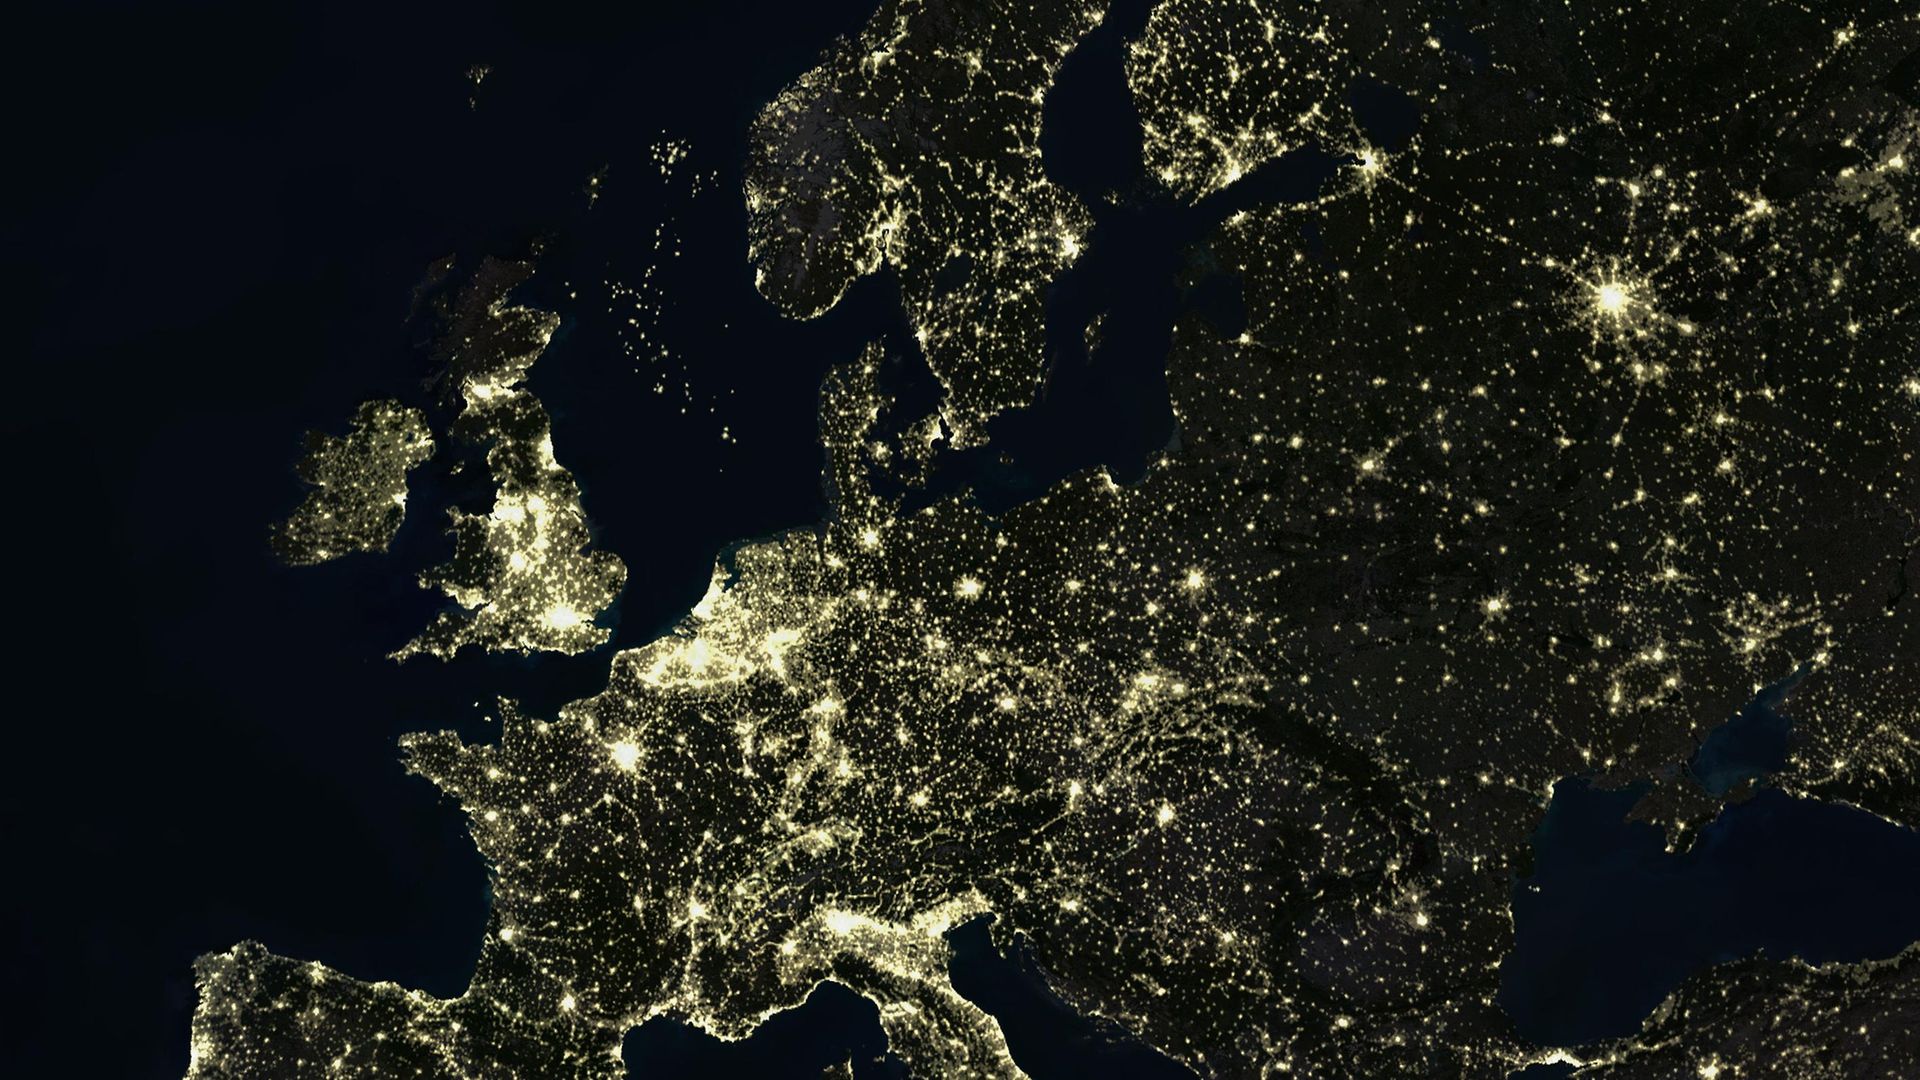 True colour satellite image of Europe and the UK at night. This image in Lambert Conformal Conic projection was compiled from data acquired by LANDSAT 5 & 7 satellites. - Credit: Universal Images Group via Getty